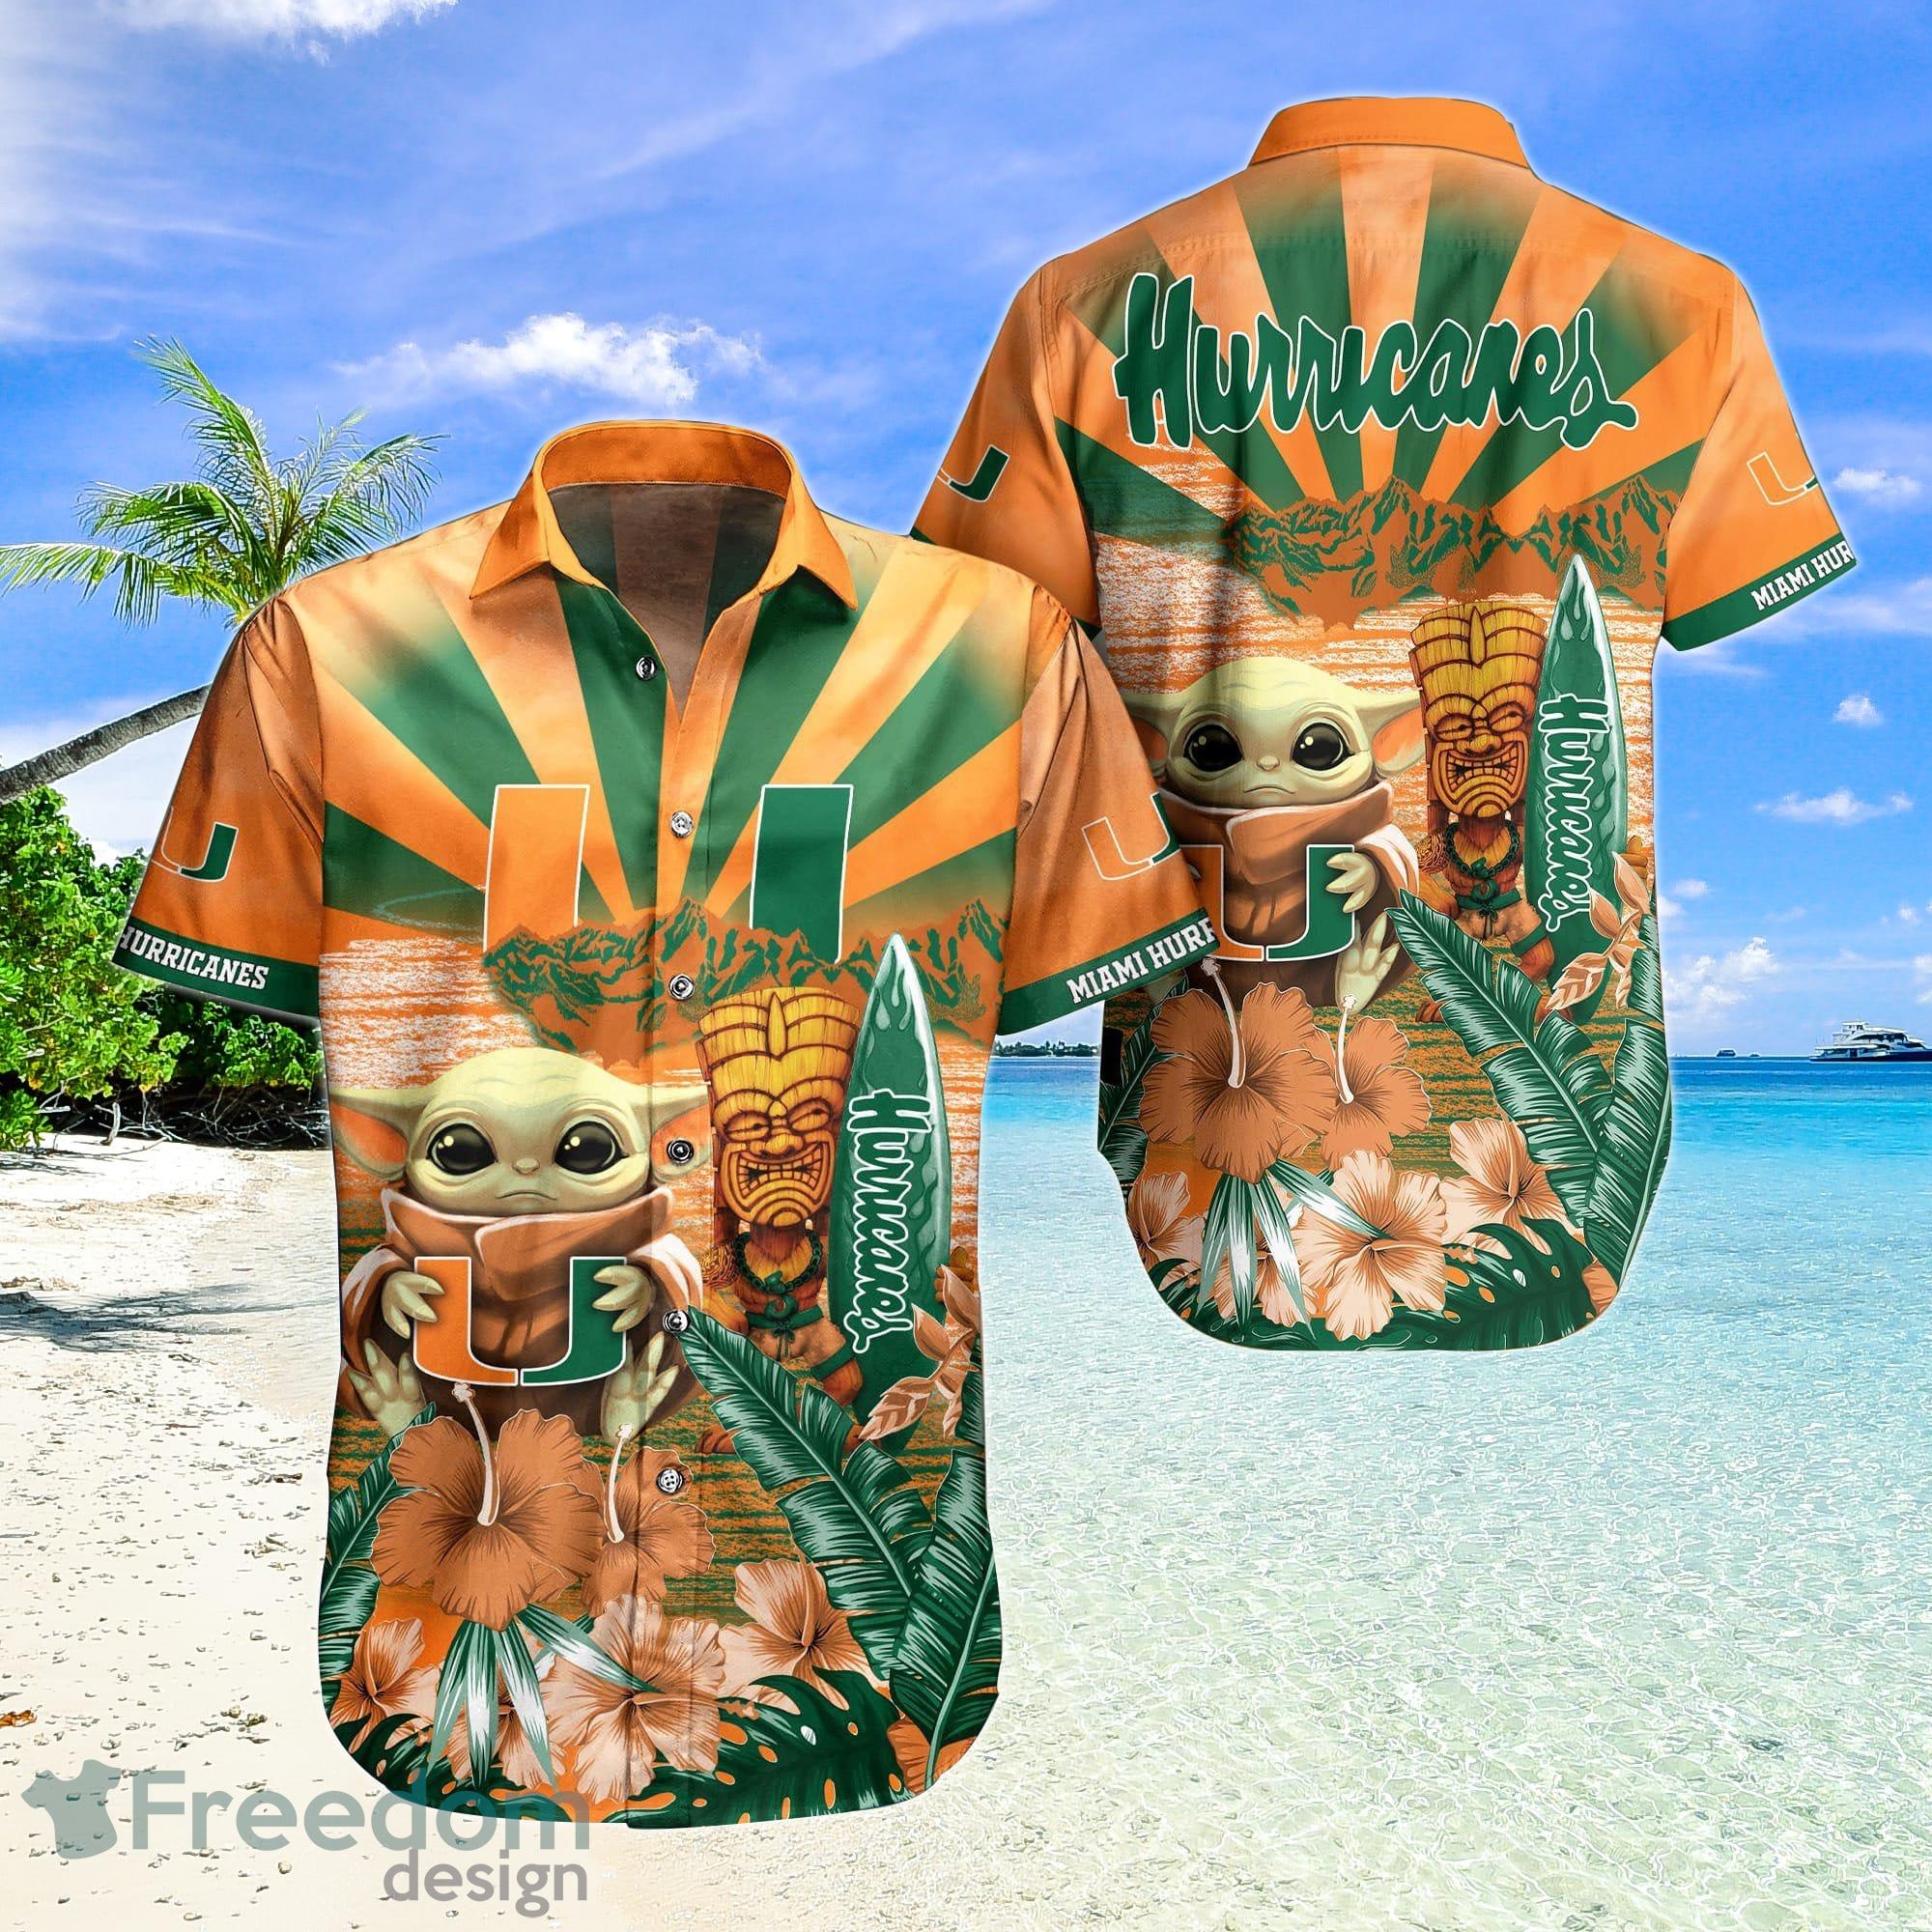 Miami Dolphins Hawaiian Shirt Team Colors Inspiration Miami Dolphins Gift -  Personalized Gifts: Family, Sports, Occasions, Trending